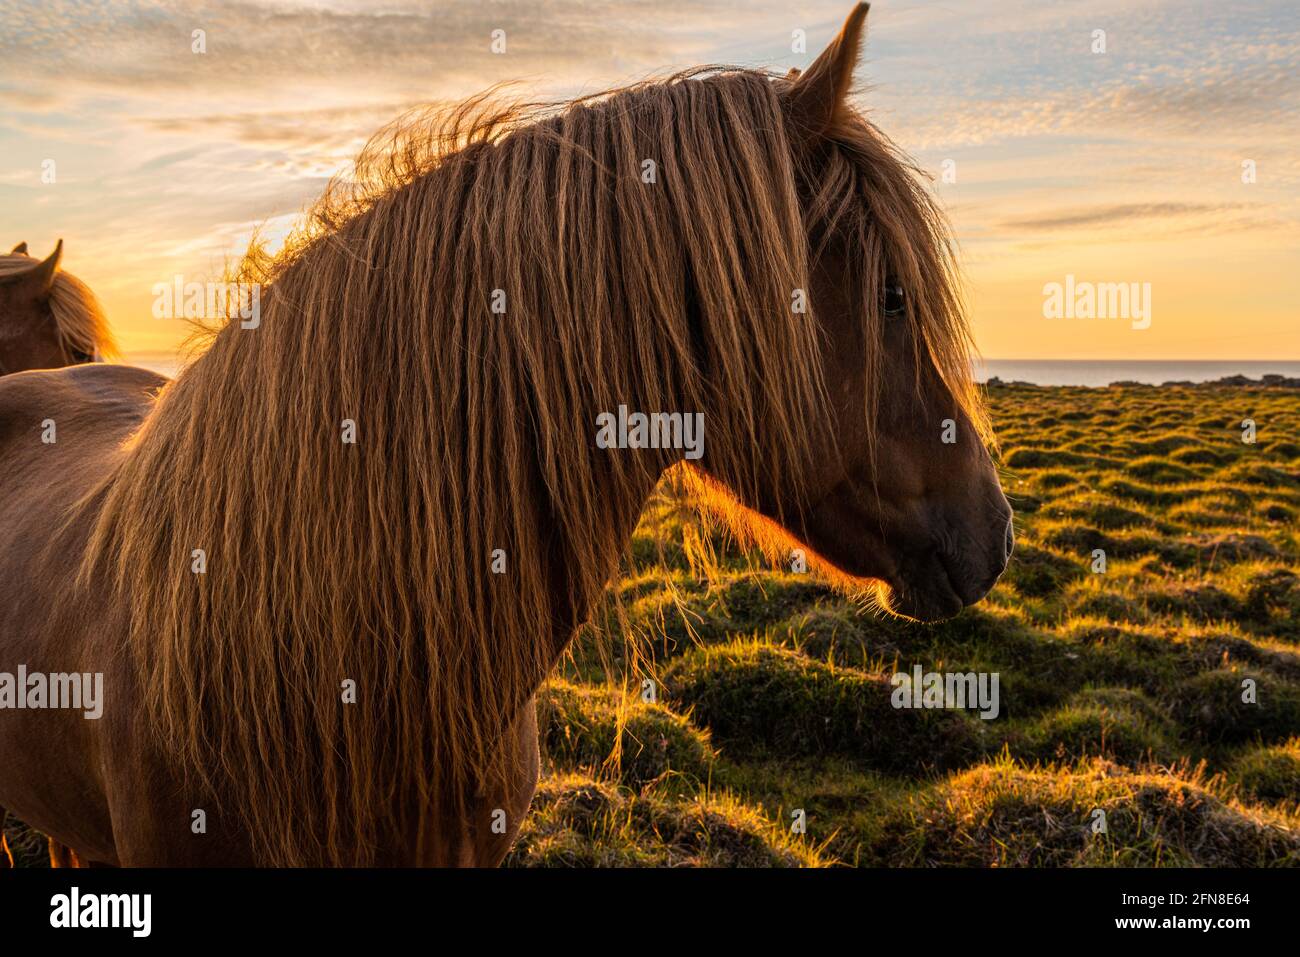 Icelandic horse in the warm evening light of a wonderful sunset Stock Photo